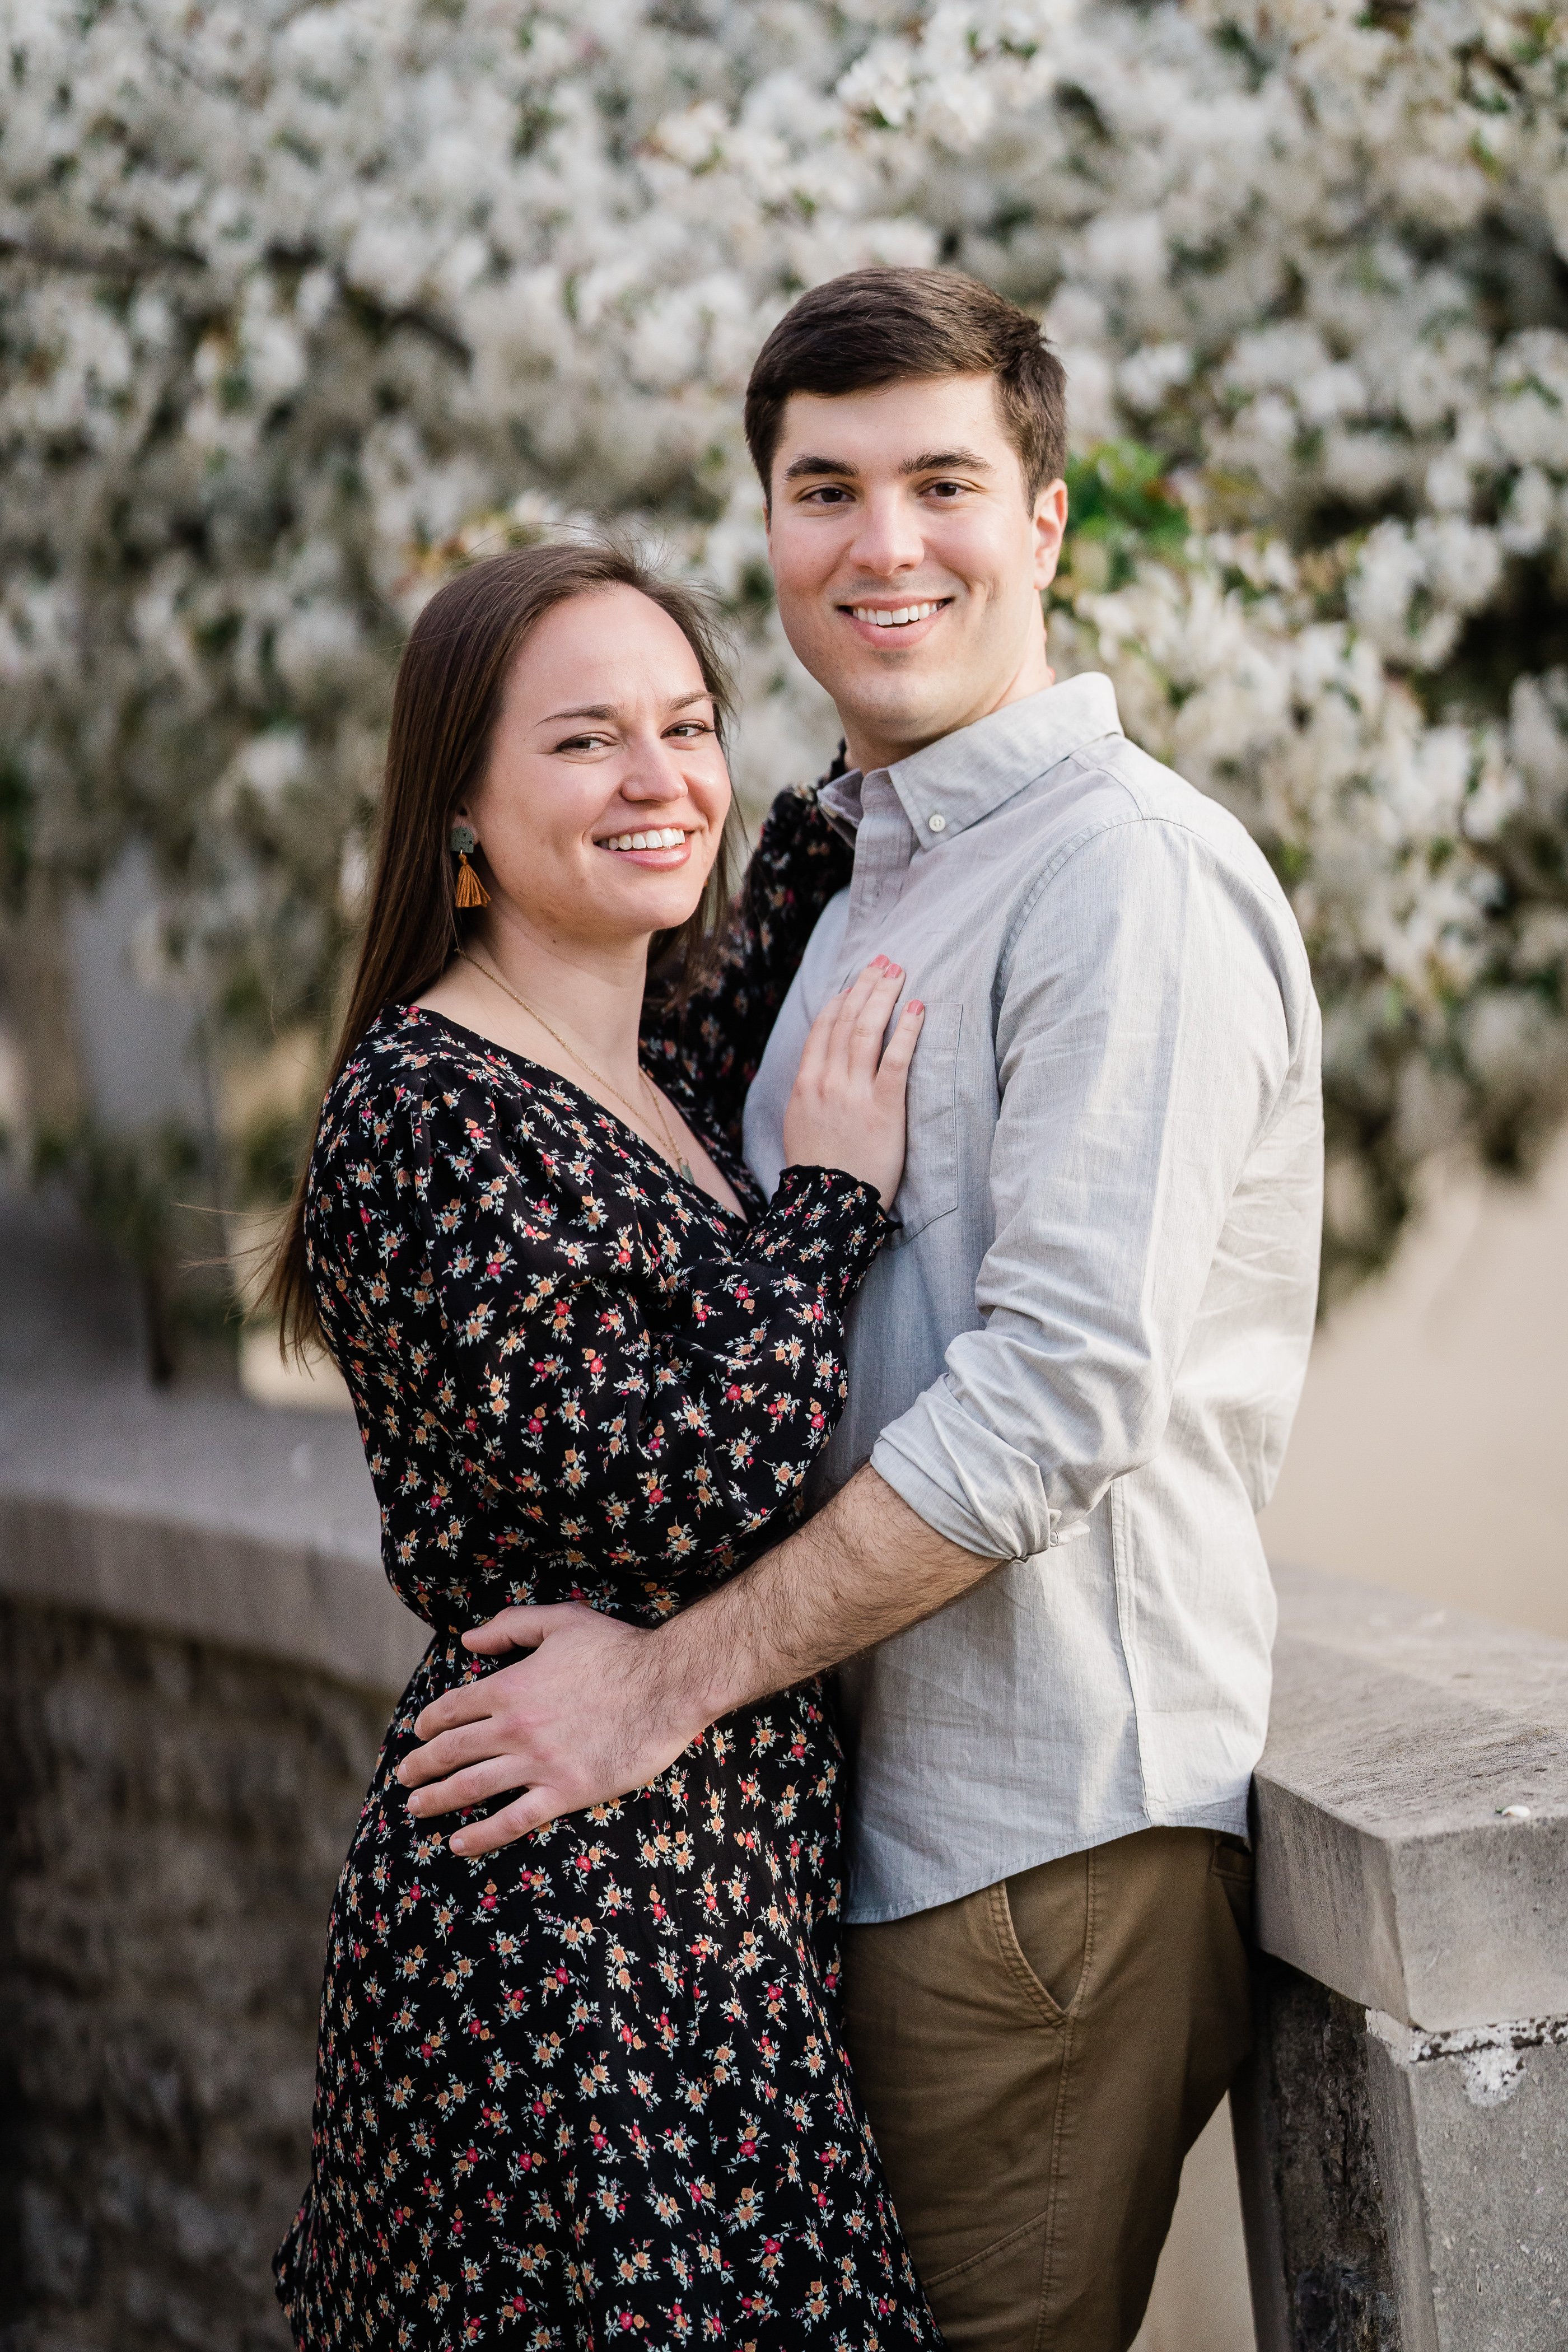 Fort Wayne engagement session in a white blossom orchard with woman in a black dress with small white dots and the man in a light grey button down